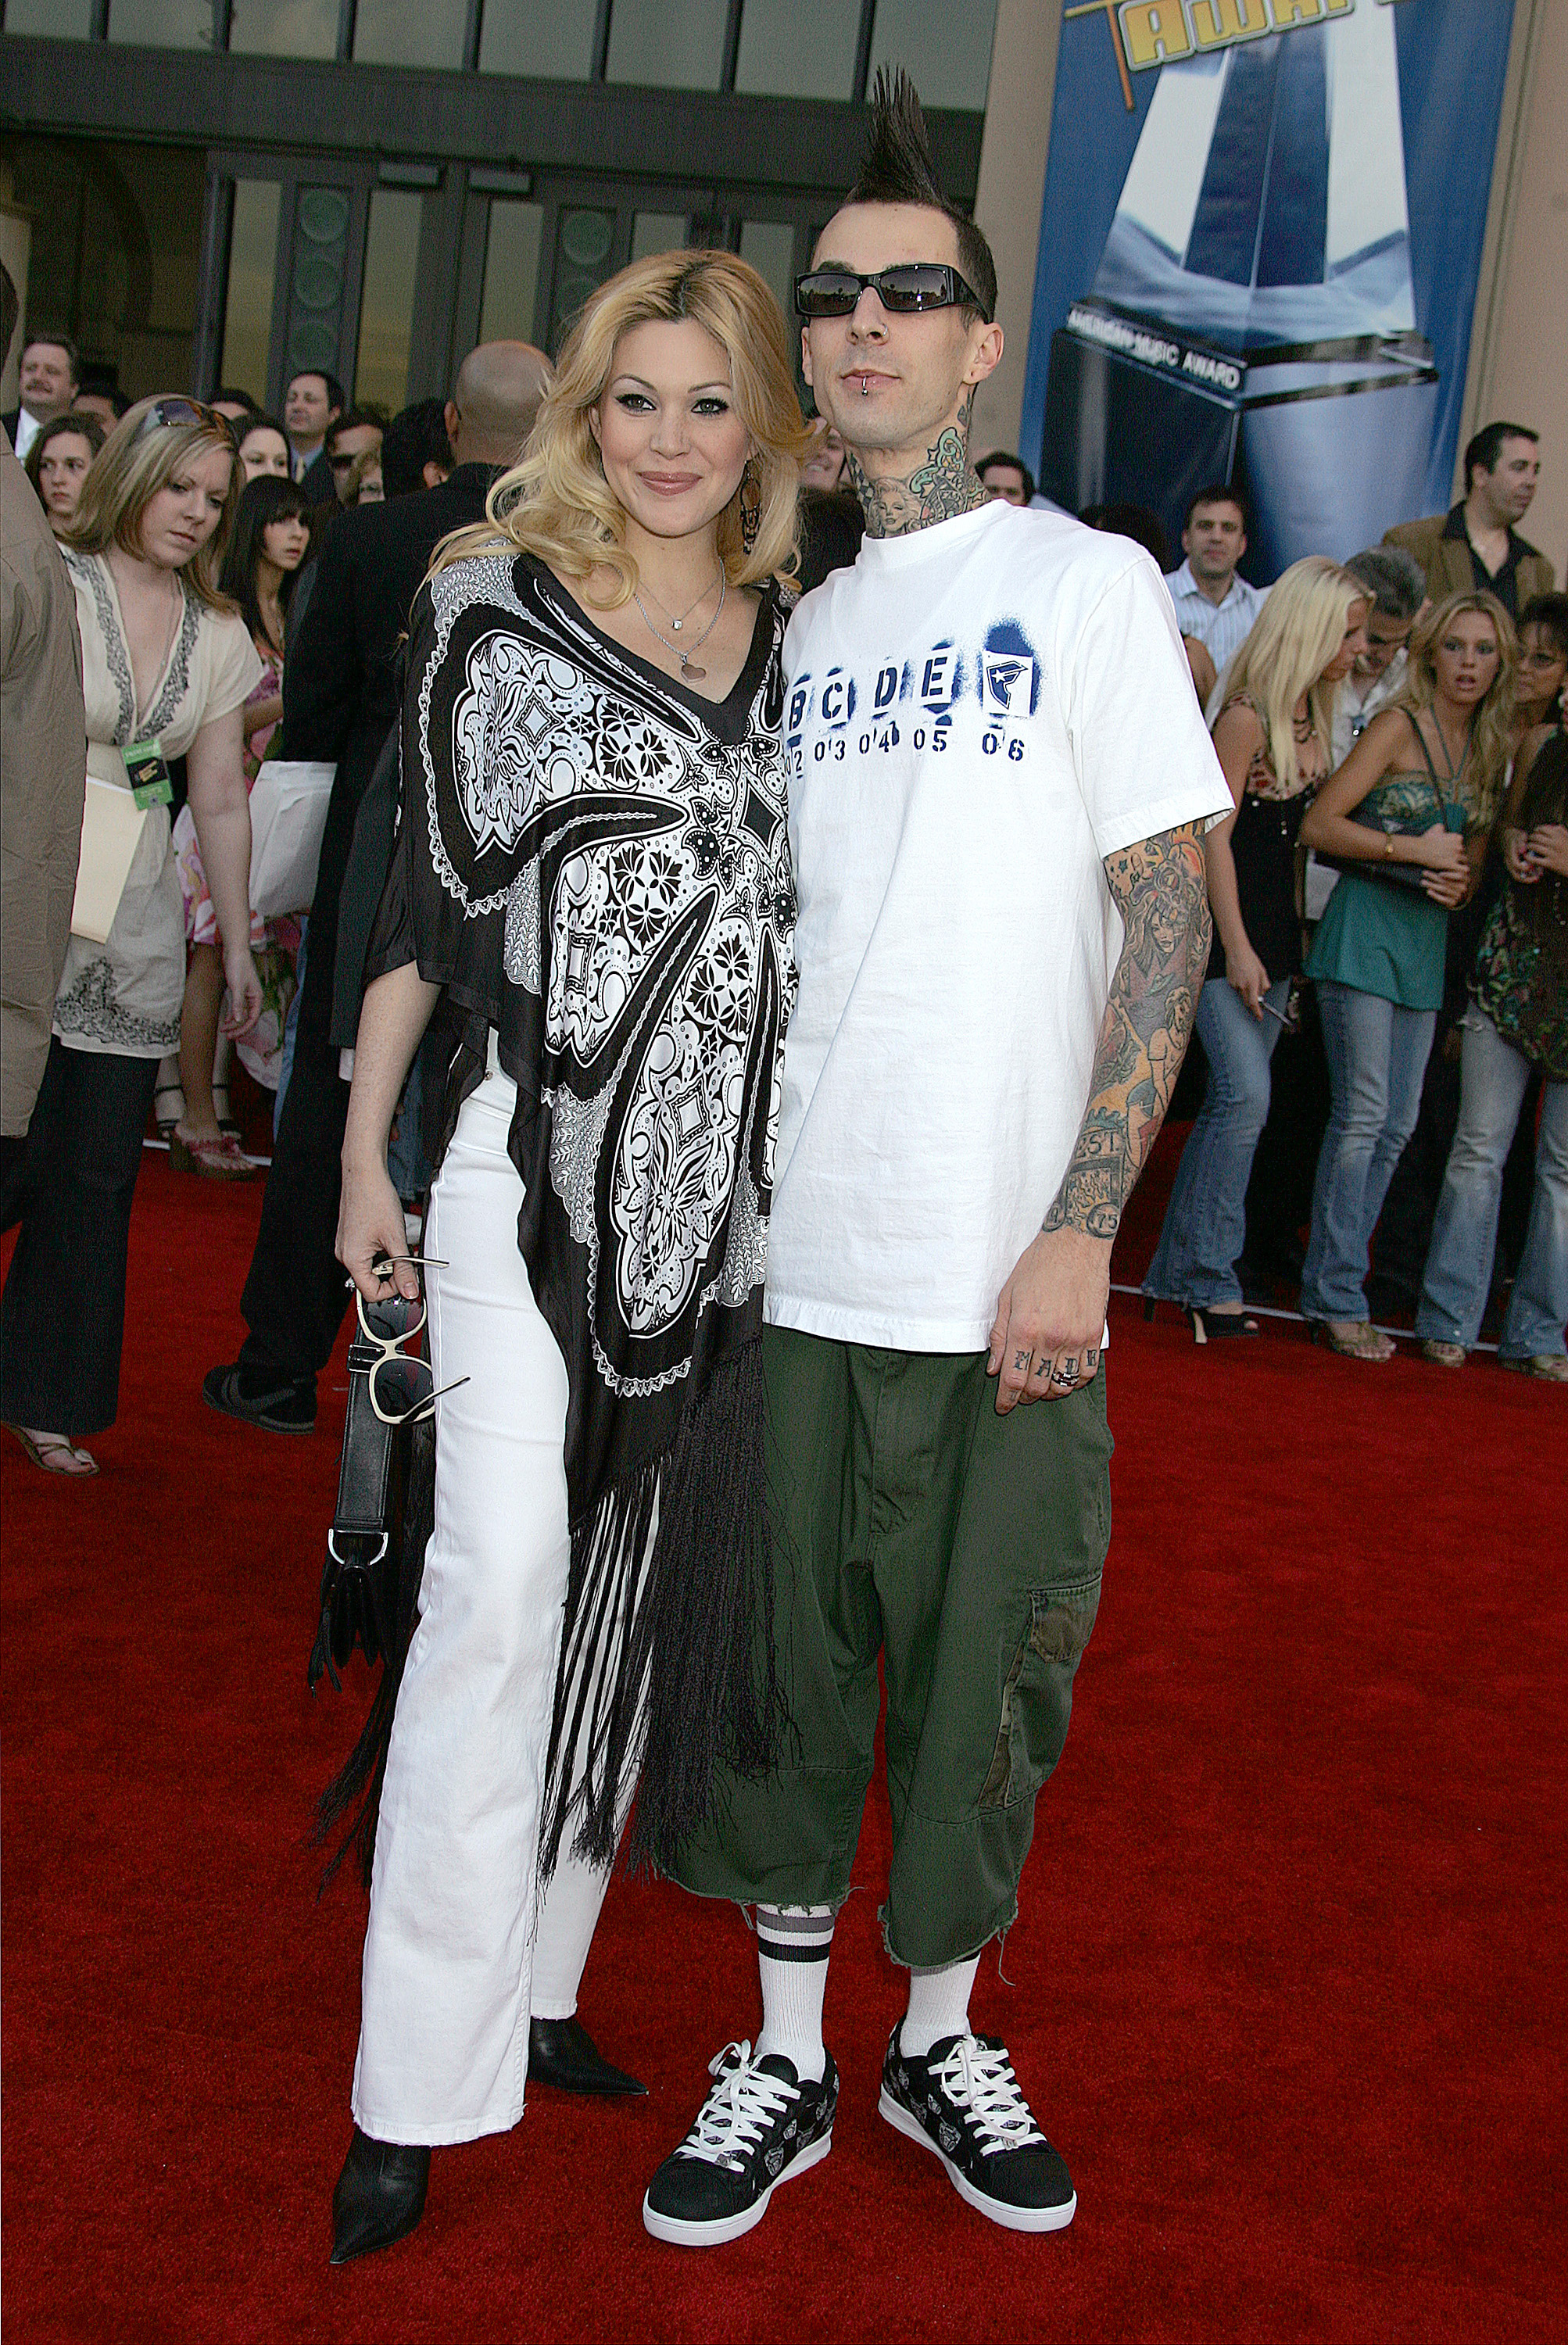 Travis Barker Attacks Ex Wife Shanna Moakler Accuses Her Of Neglecting Their Kids Report In Touch Weekly The image is available for download in high resolution quality up to 1960x3008. https www intouchweekly com posts travis barker attacks ex wife shanna moakler accuses her of neglecting their kids report 92180